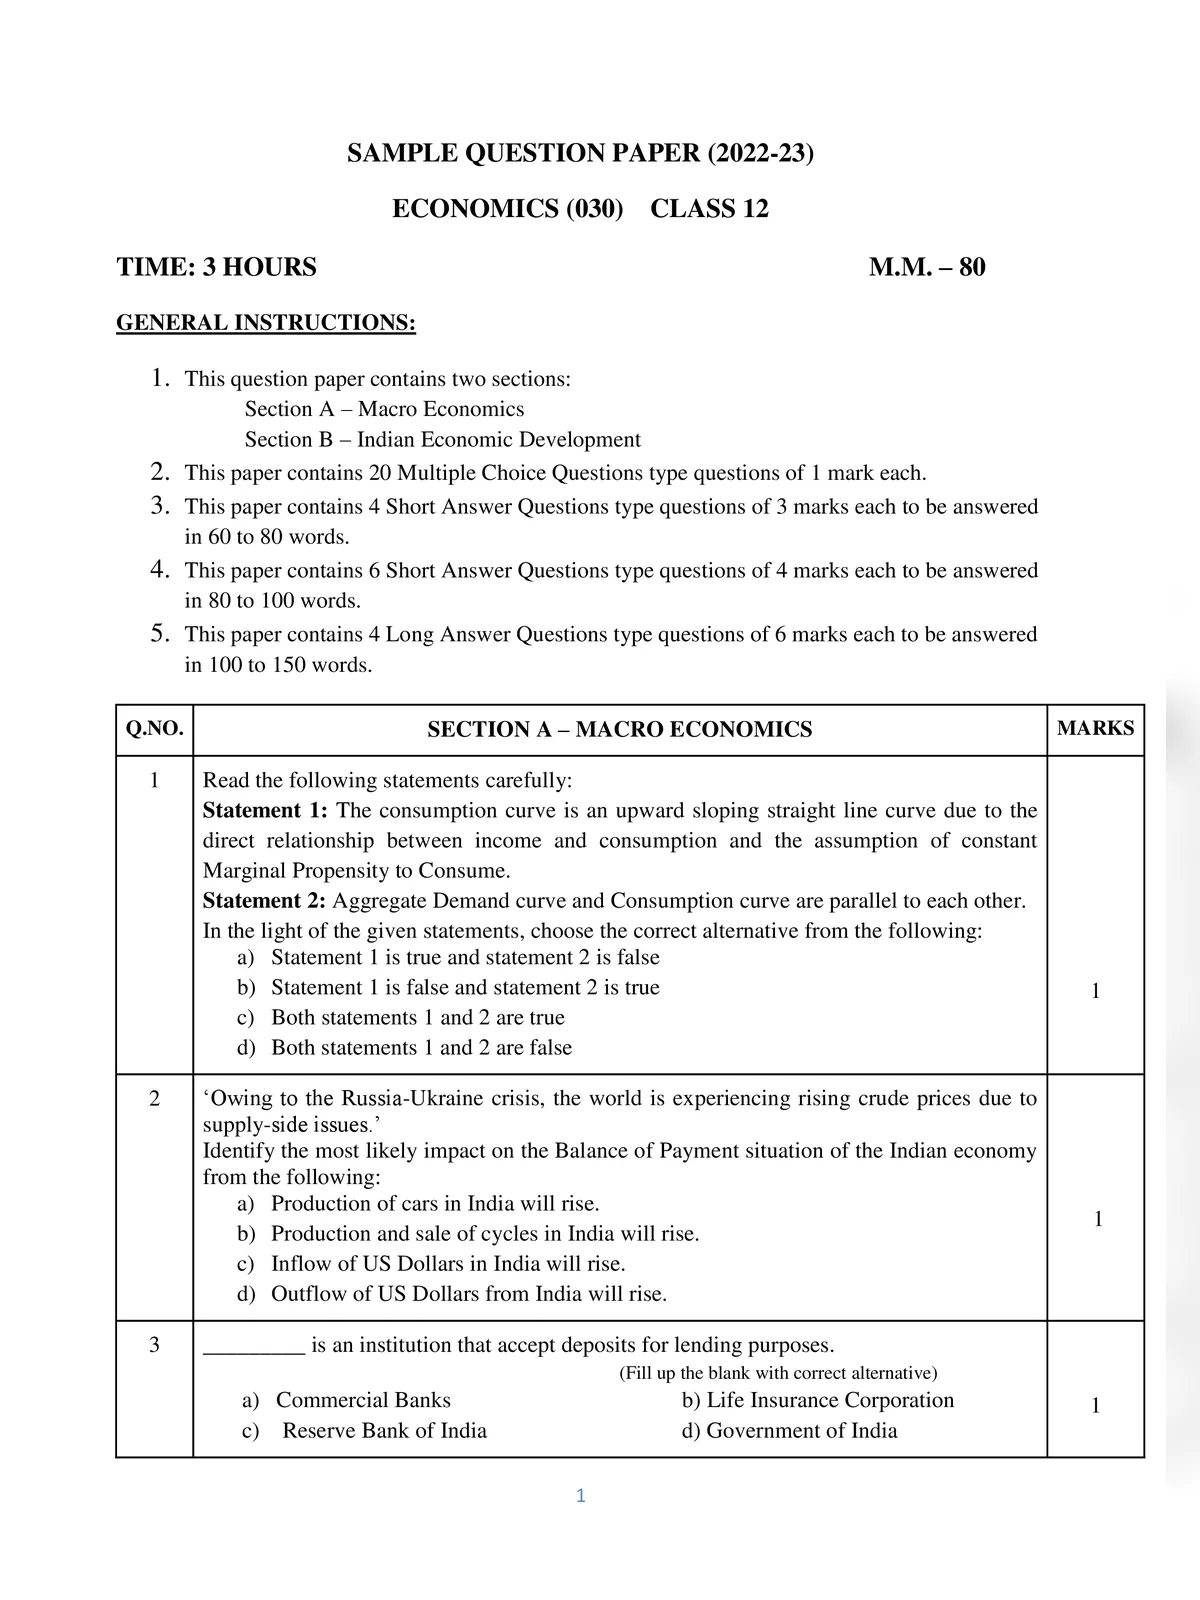 Sample Paper of Economics Class 12 with Solution 2023